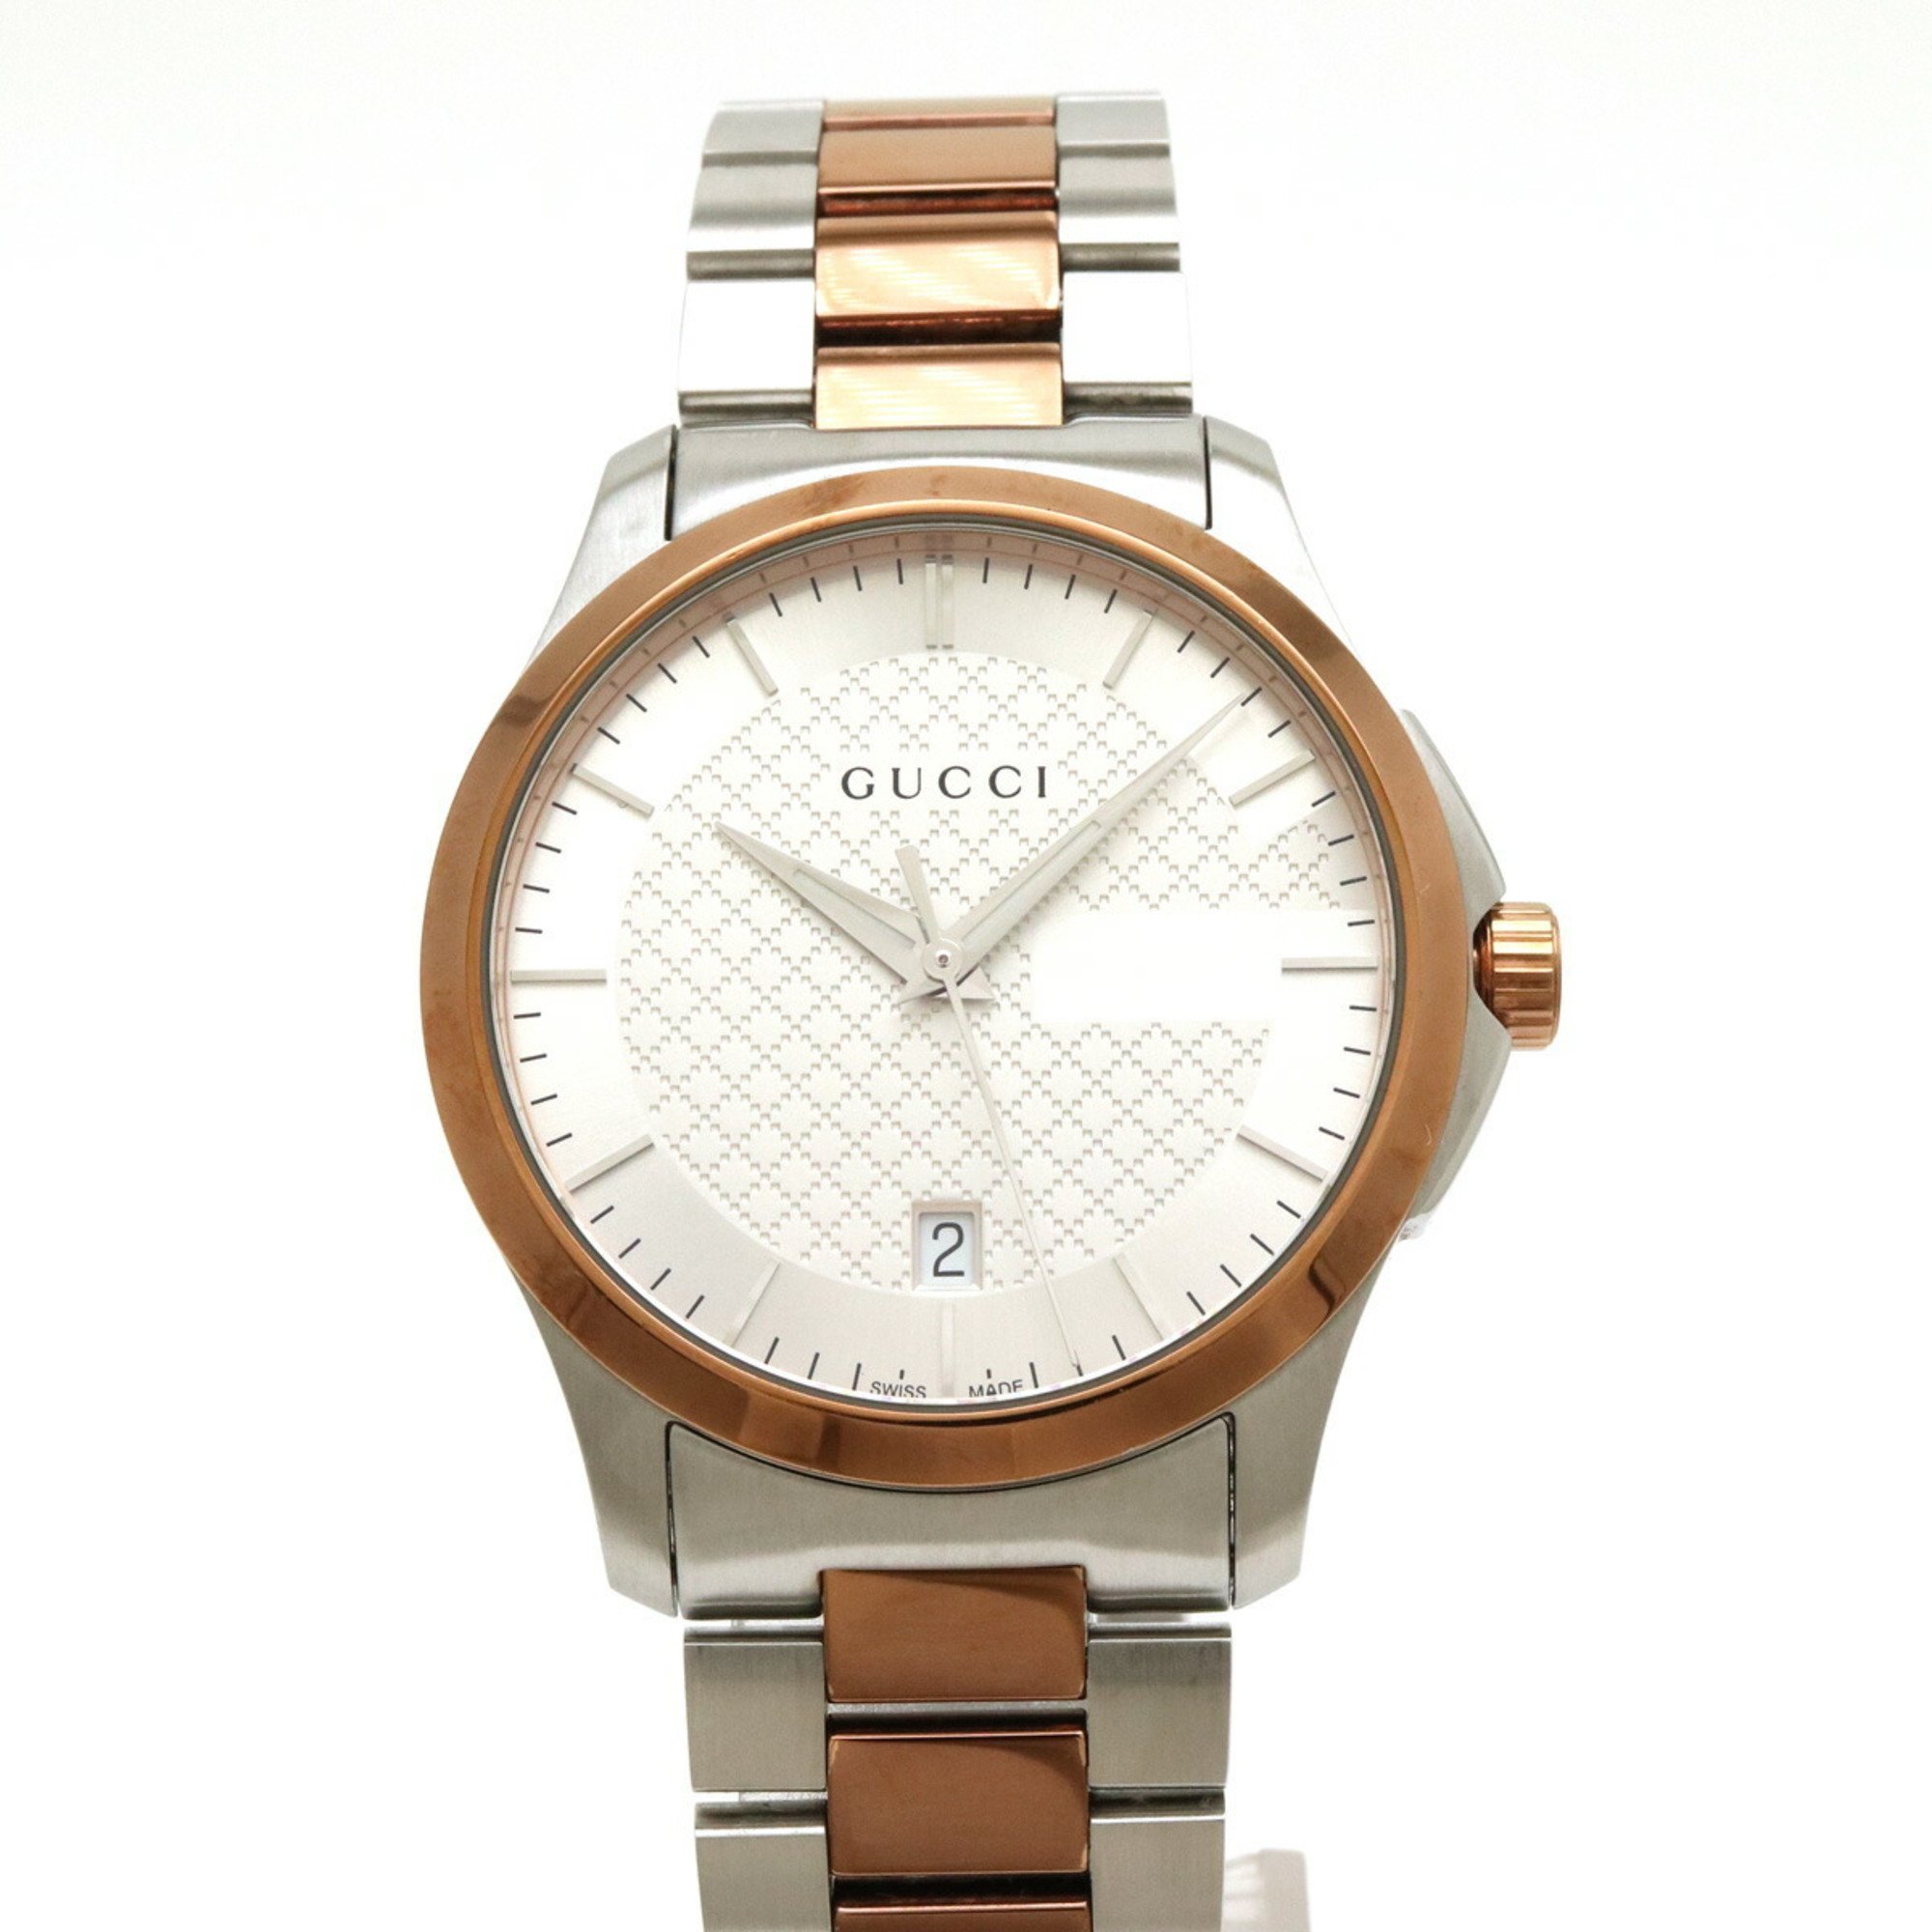 GUCCI G Timeless Collection Date SS PGPVD Silver Dial Men's Quartz Watch YA126447 126.4